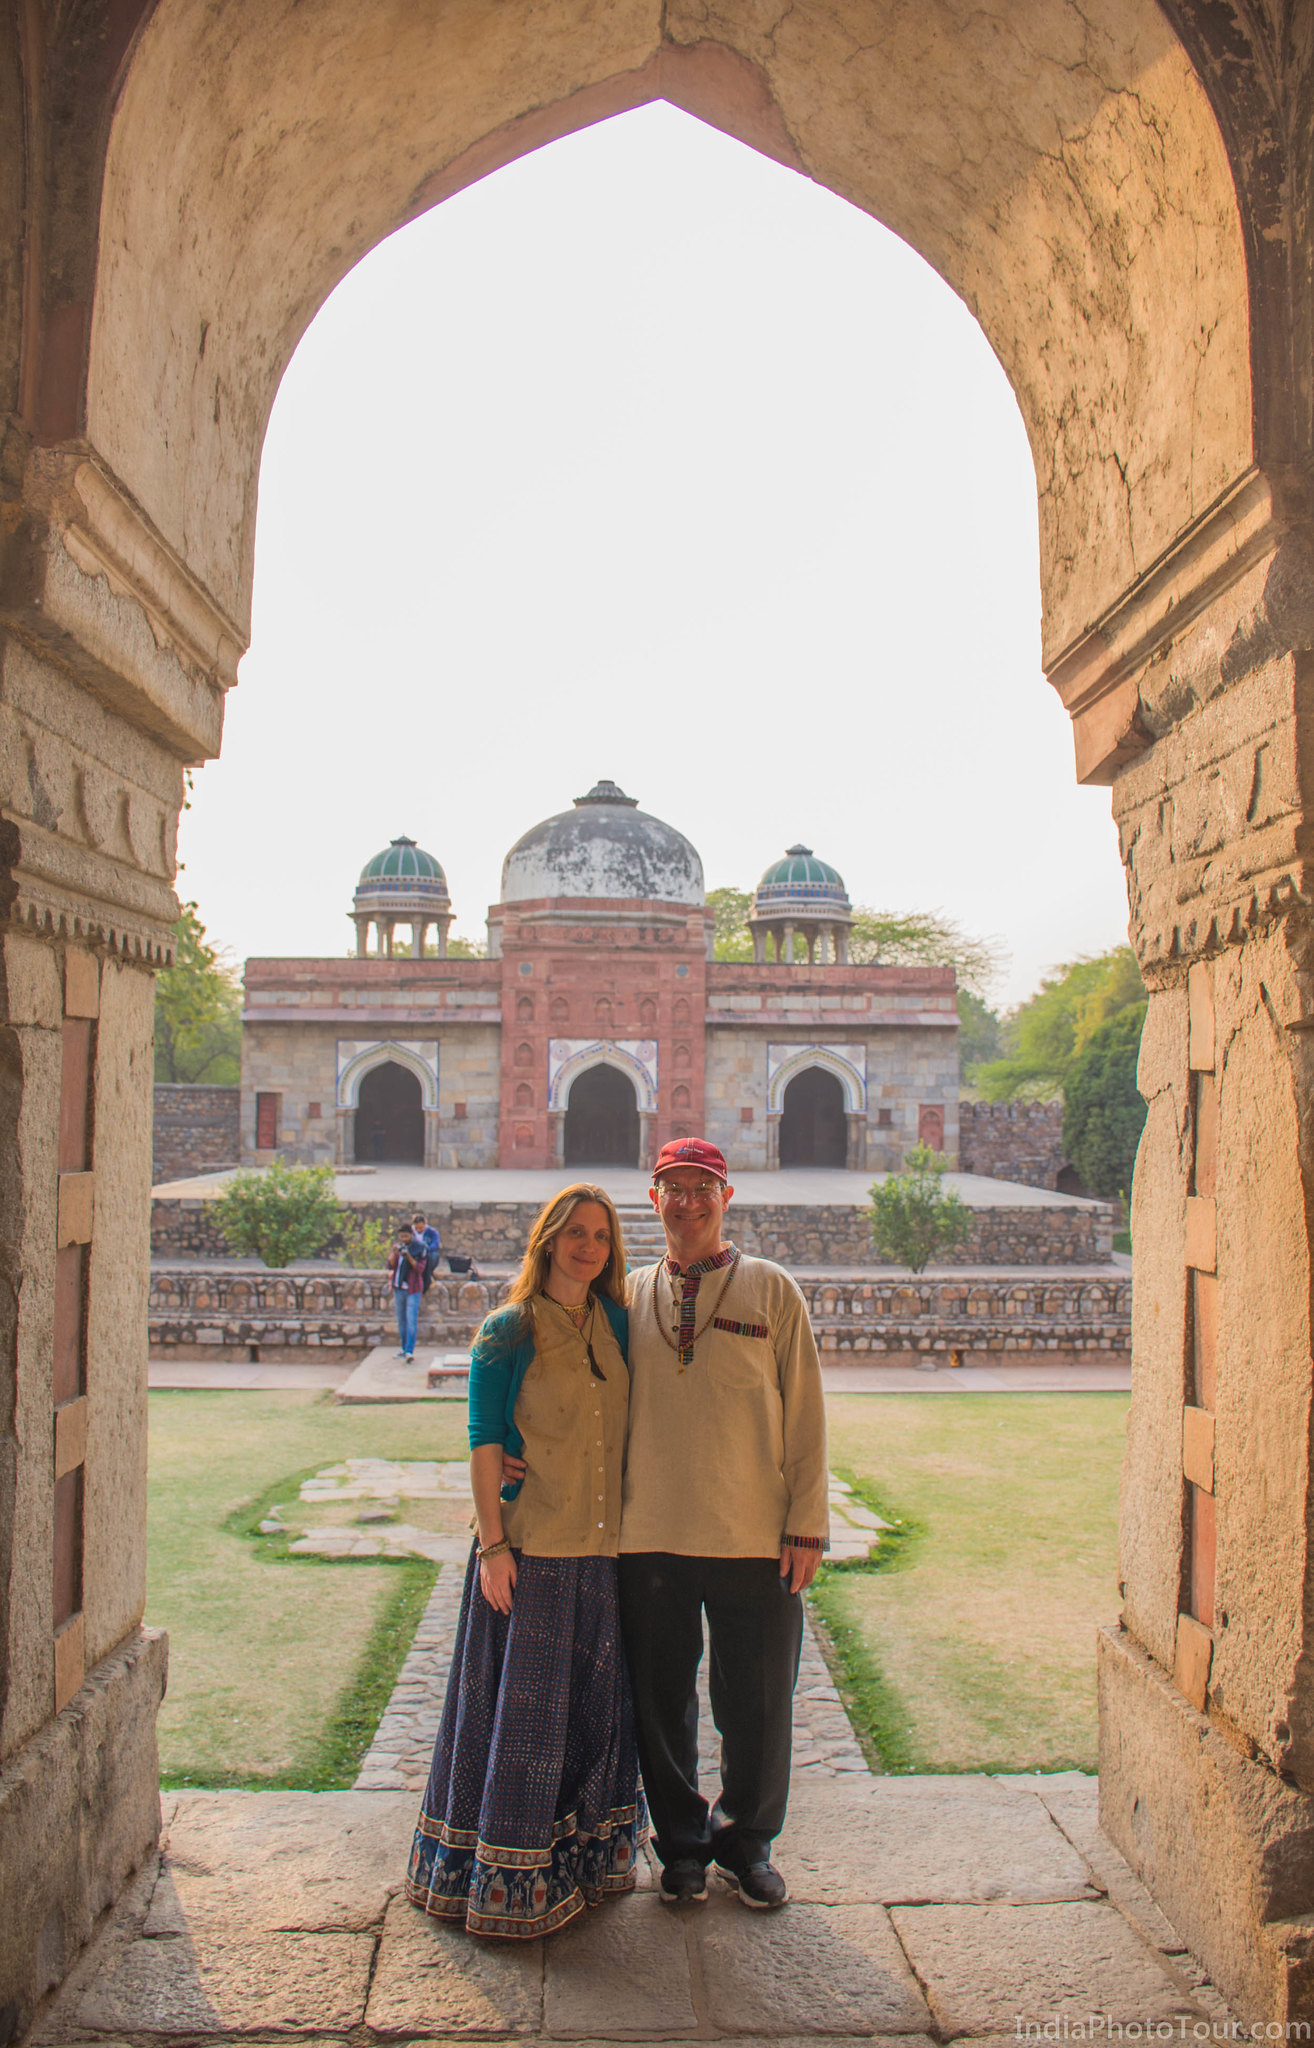 Starting at Isa Khan's tomb in Humayun's Tomb complex